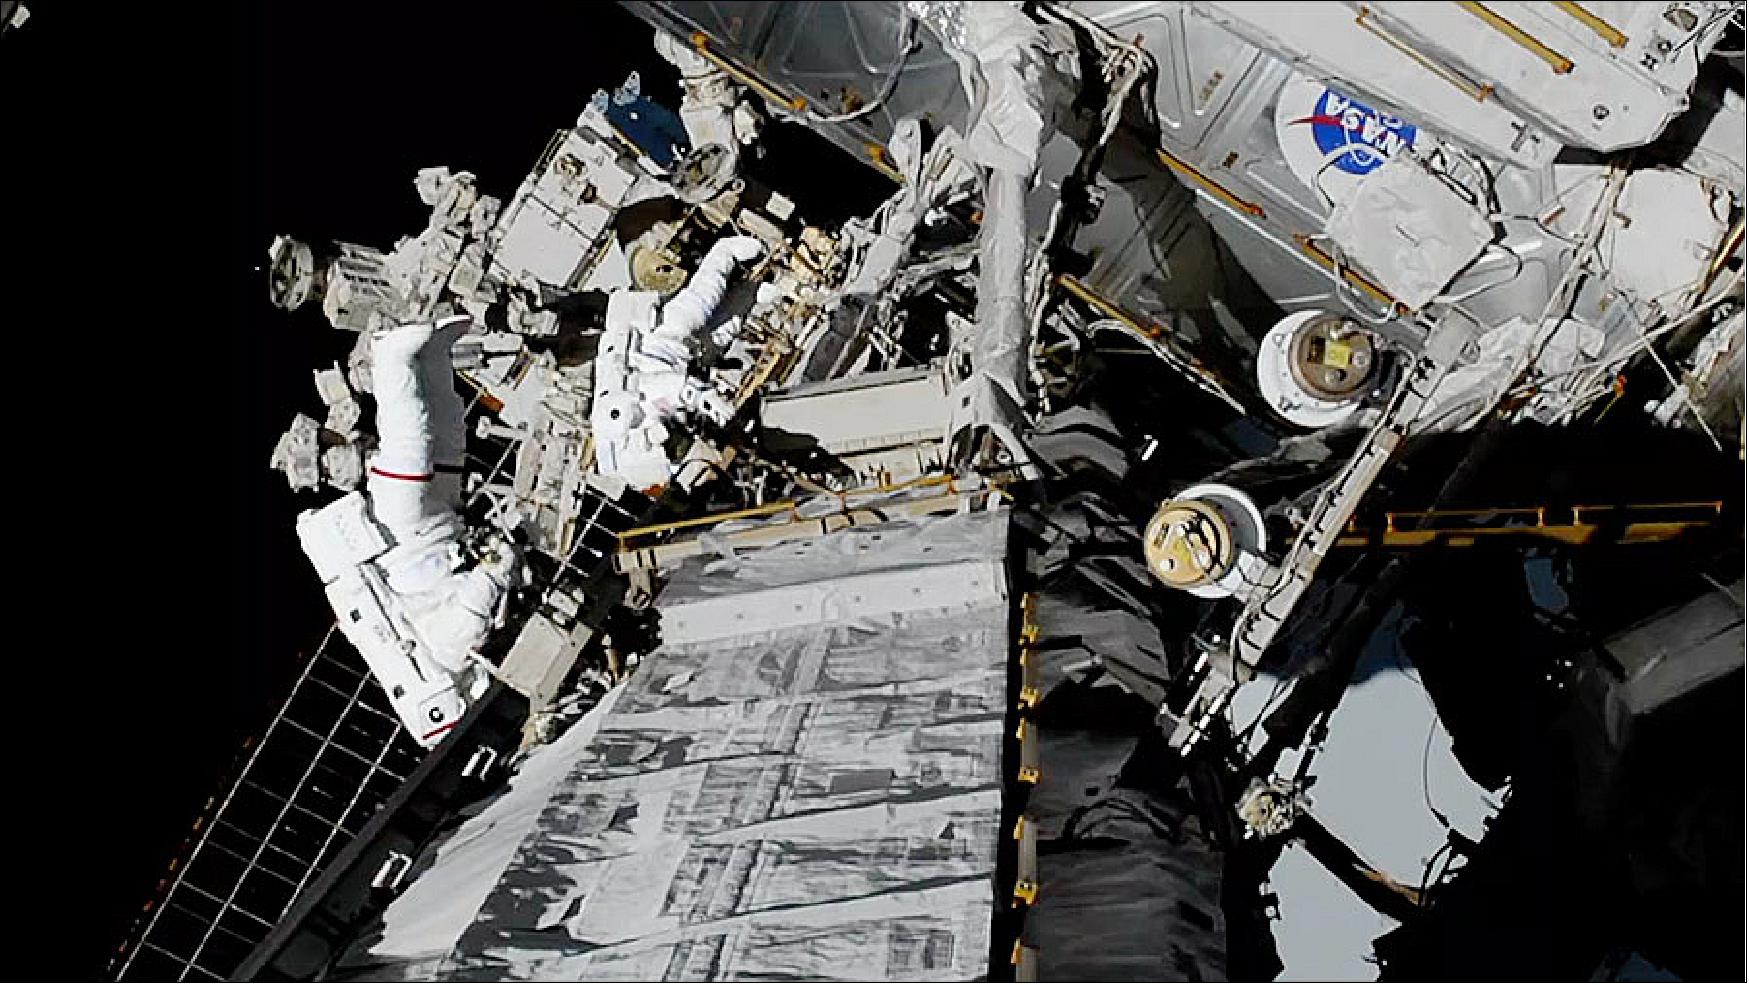 Figure 31: NASA spacewalkers Christina Koch (foreground, suit with red stripe) and Jessica Meir (suit with no stripes) replaced a failed BCDU (Battery Charge-Discharge Unit) with a new one during a 7-hour, 17-minute spacewalk (image credit: NASA TV)